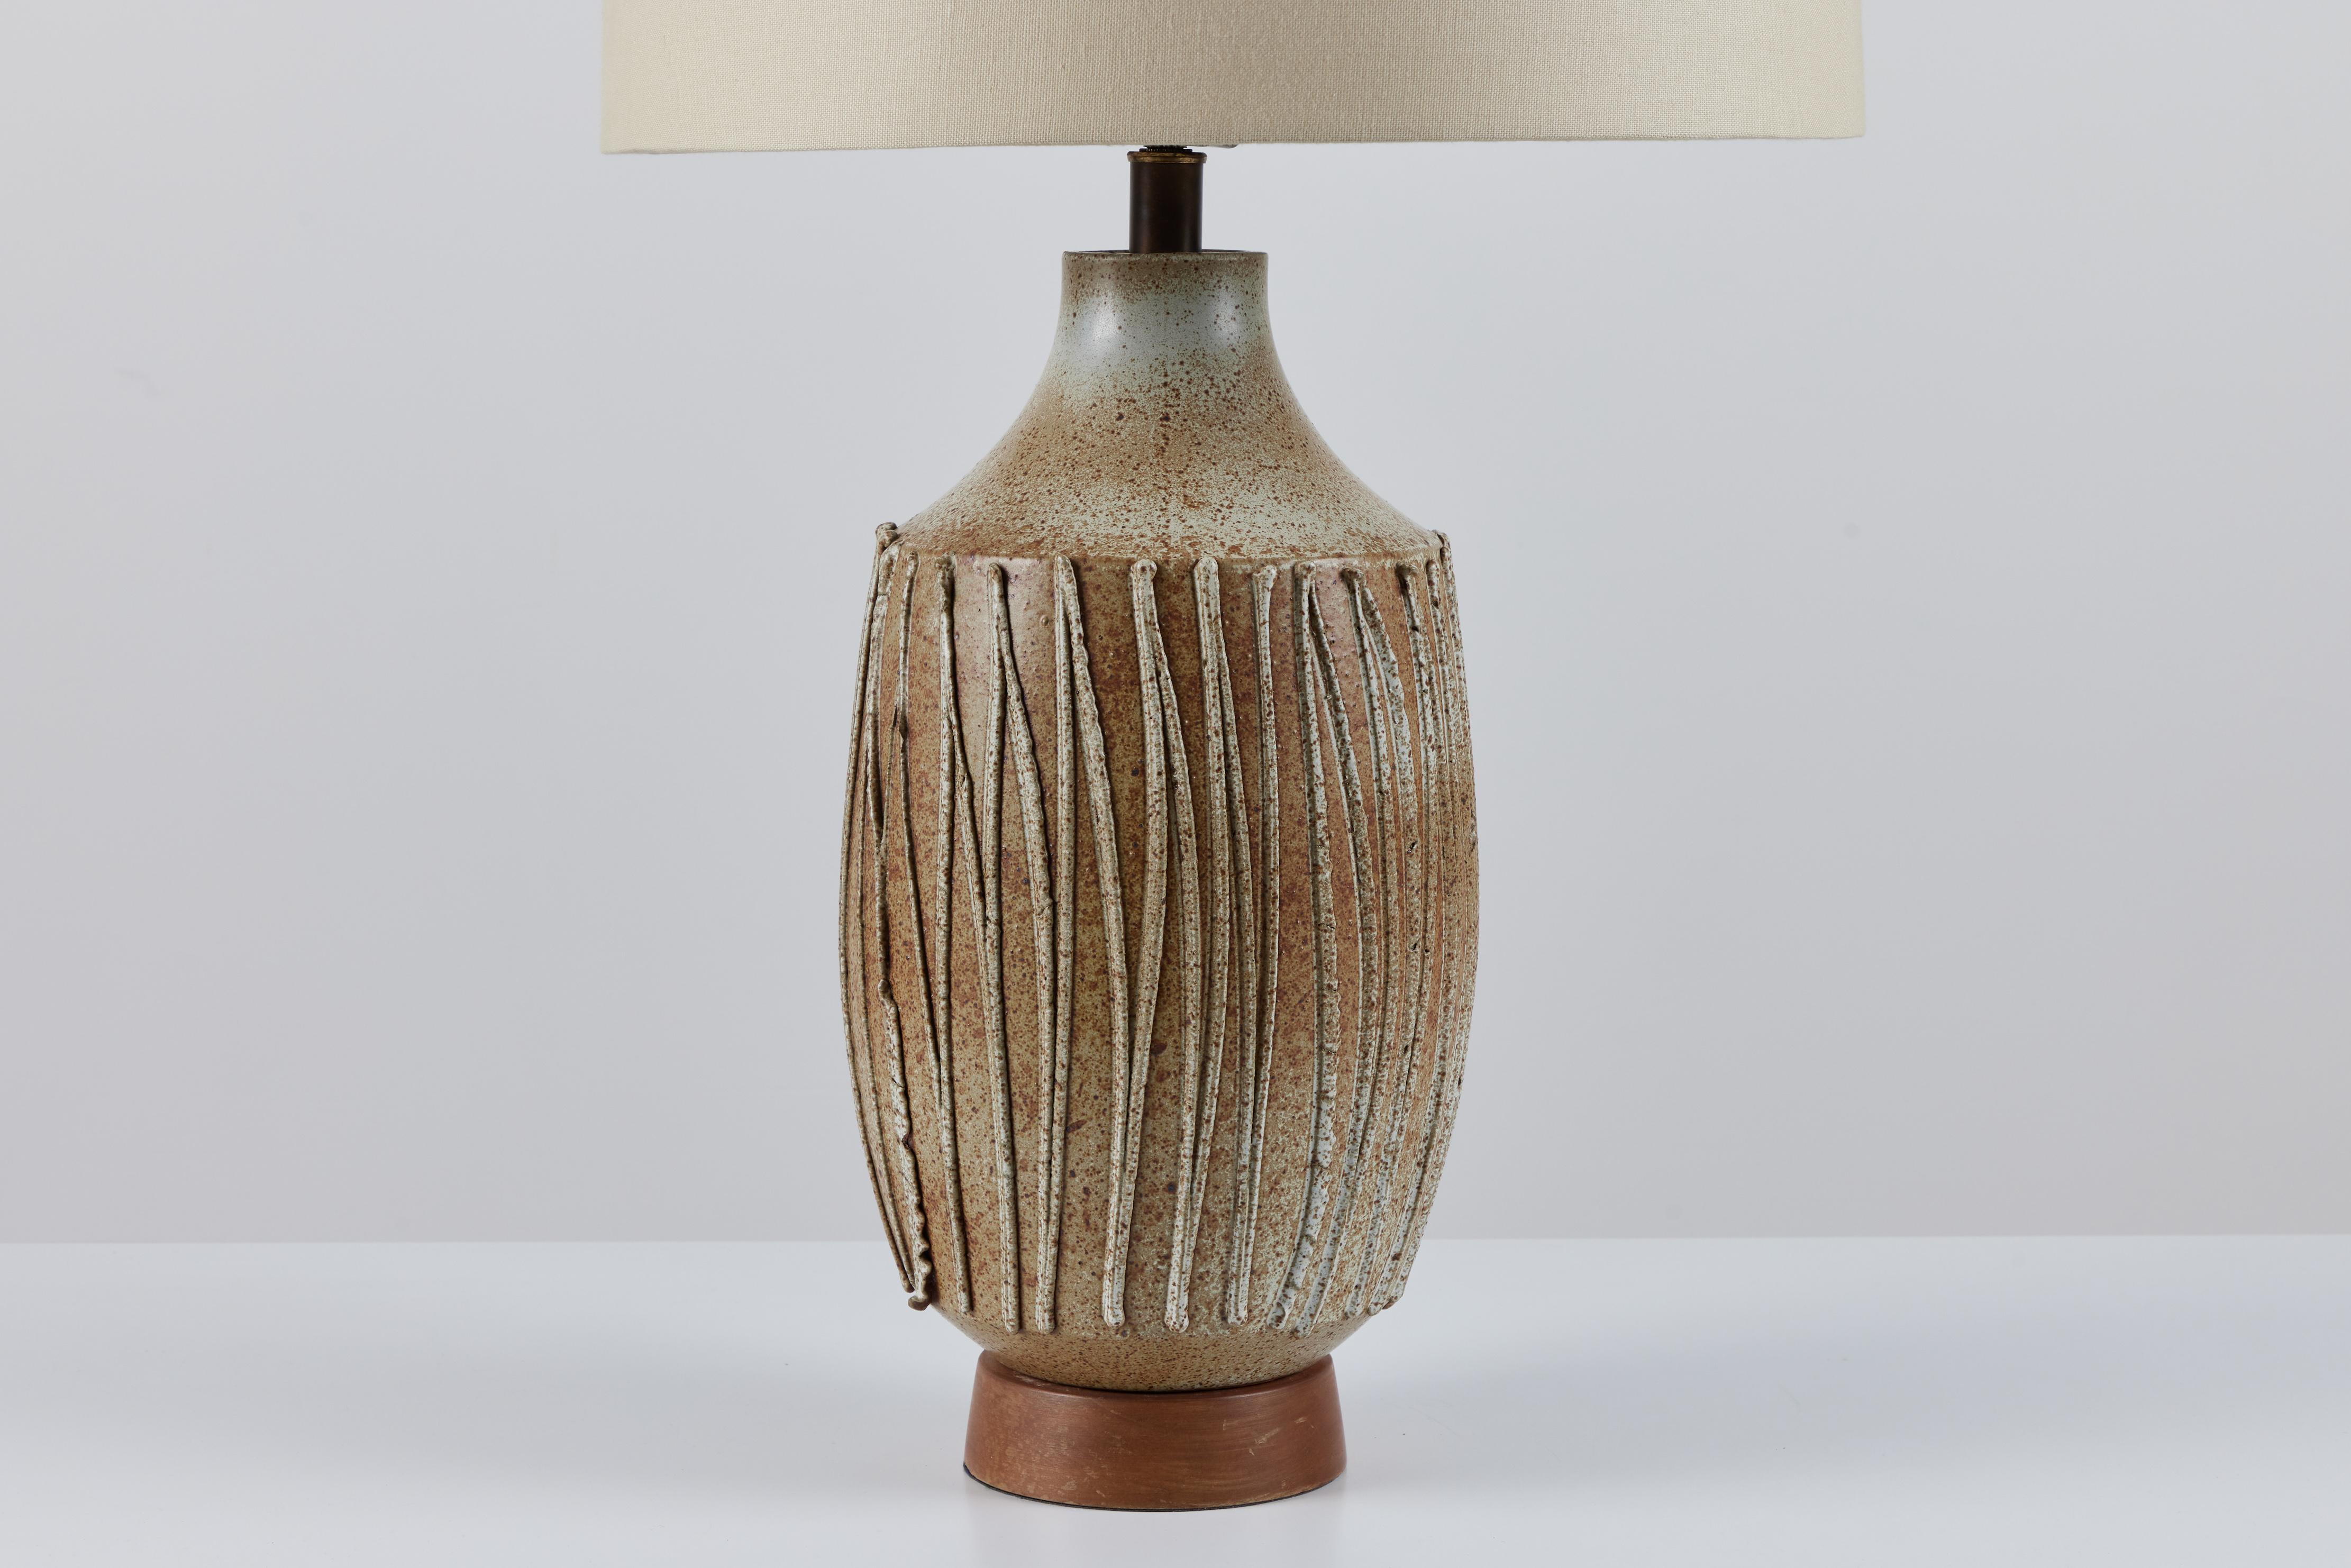 20th Century David Cressey Textured Stoneware Lamp for Architectural Pottery